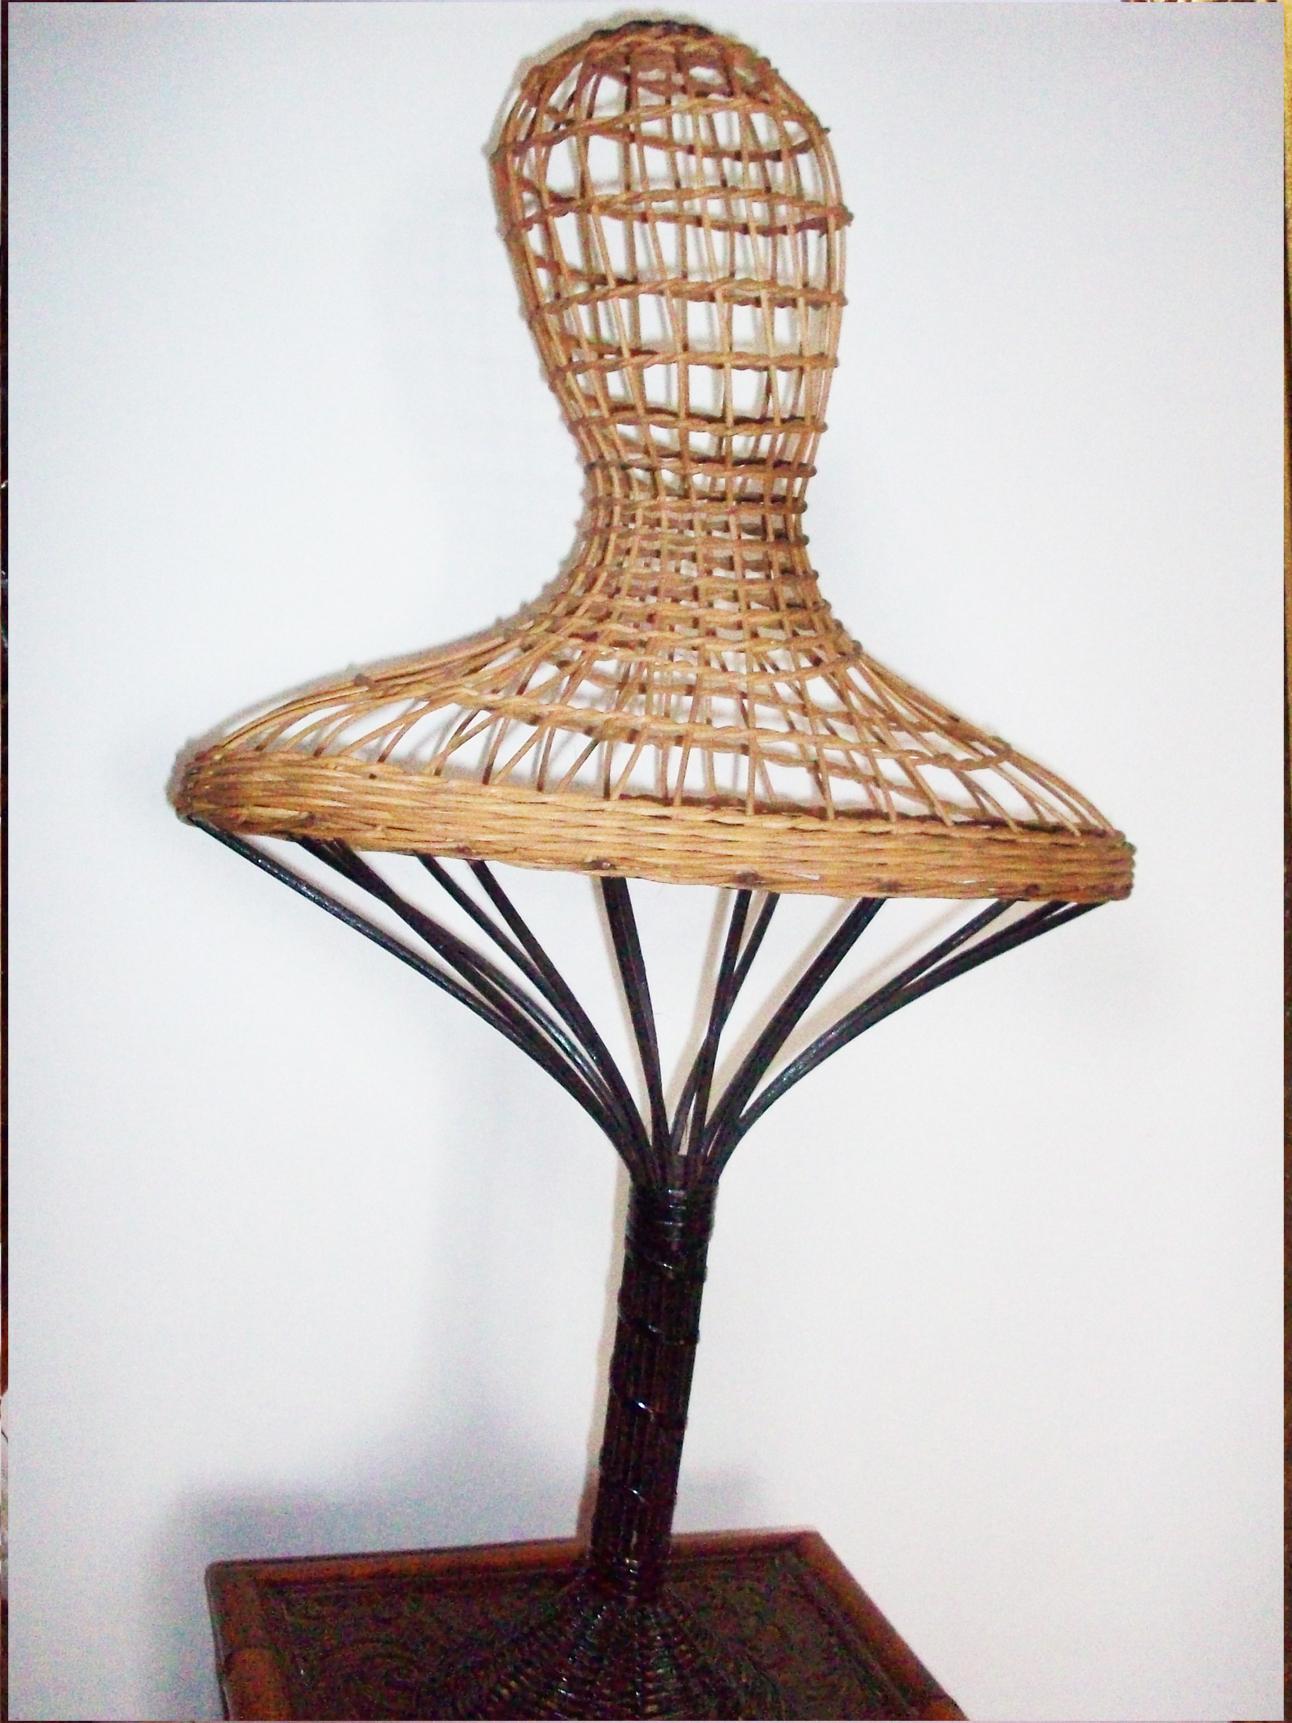 beautiful wicker mannequin head woven in natural color and black color on the base
 It has a very beautiful shape that gives it a very attractive and sculptural appearance. but to be used it is perfect as a decorative item